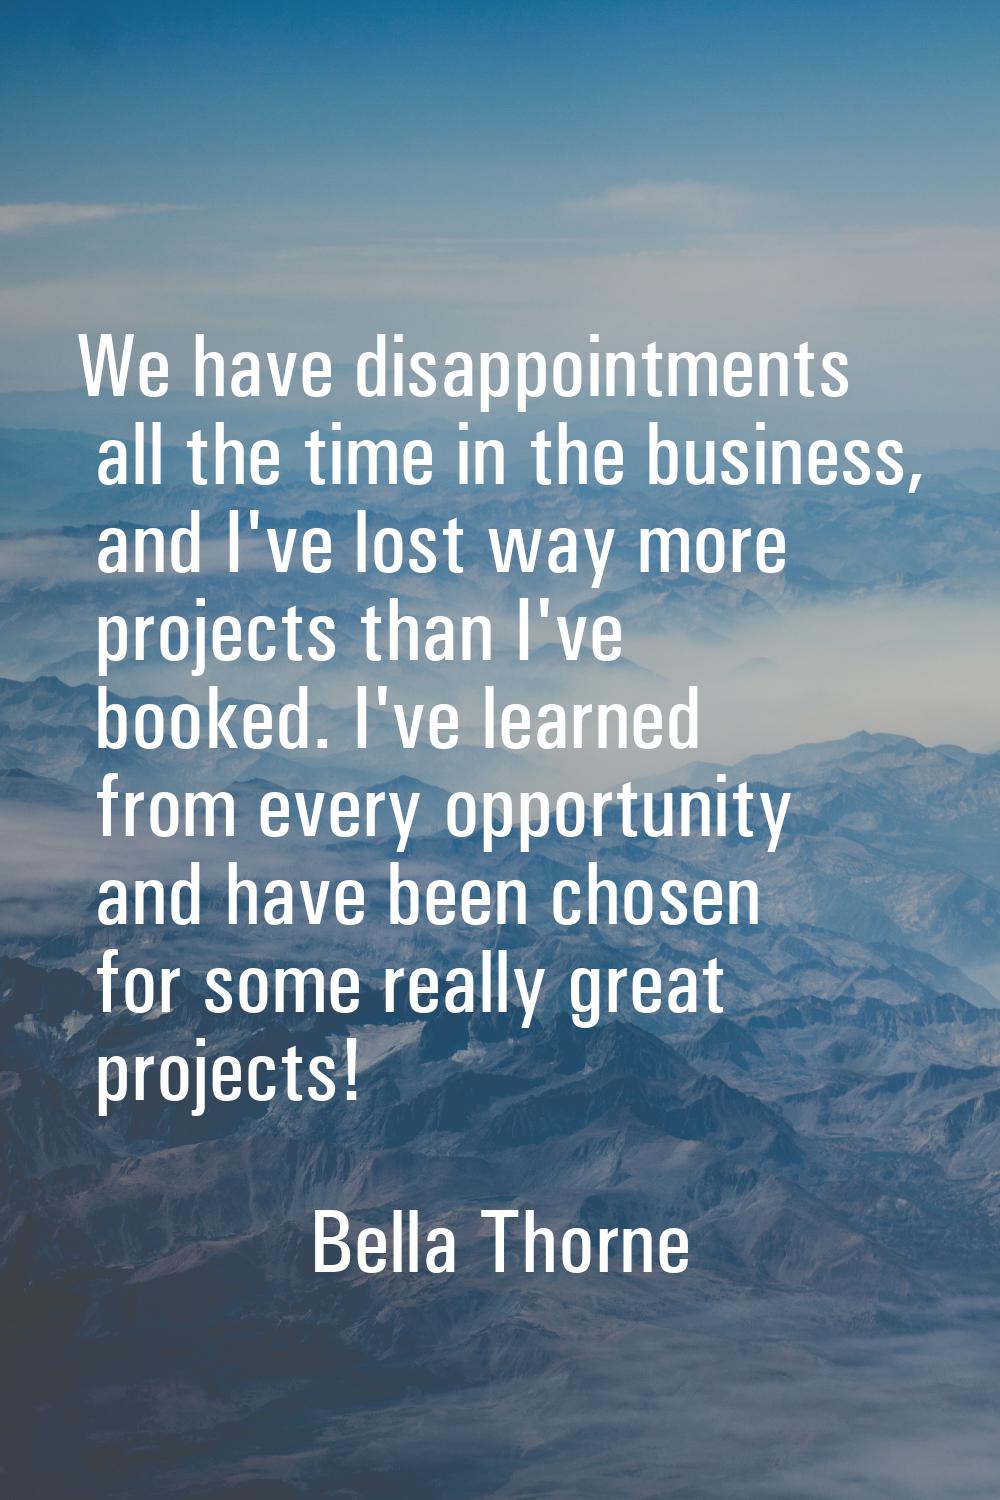 We have disappointments all the time in the business, and I've lost way more projects than I've boo